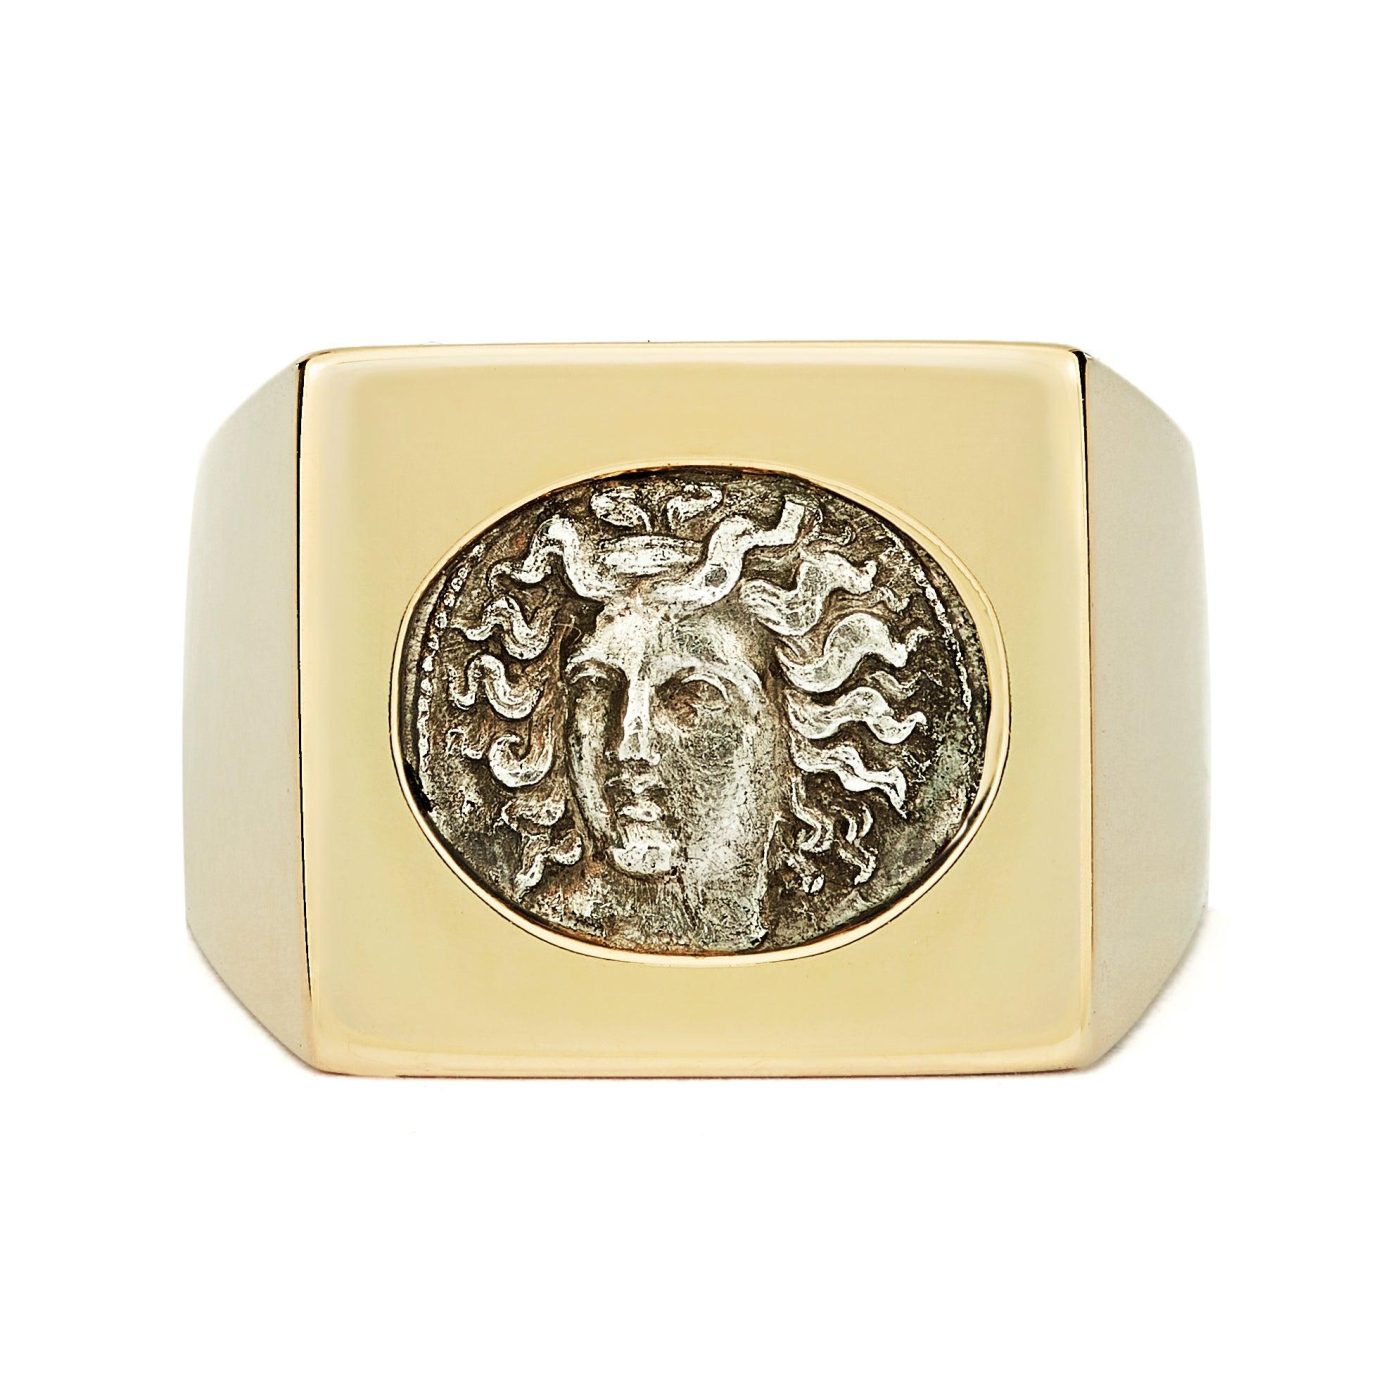 Nymph Larissa Ancient Silver Coin Signet Ring